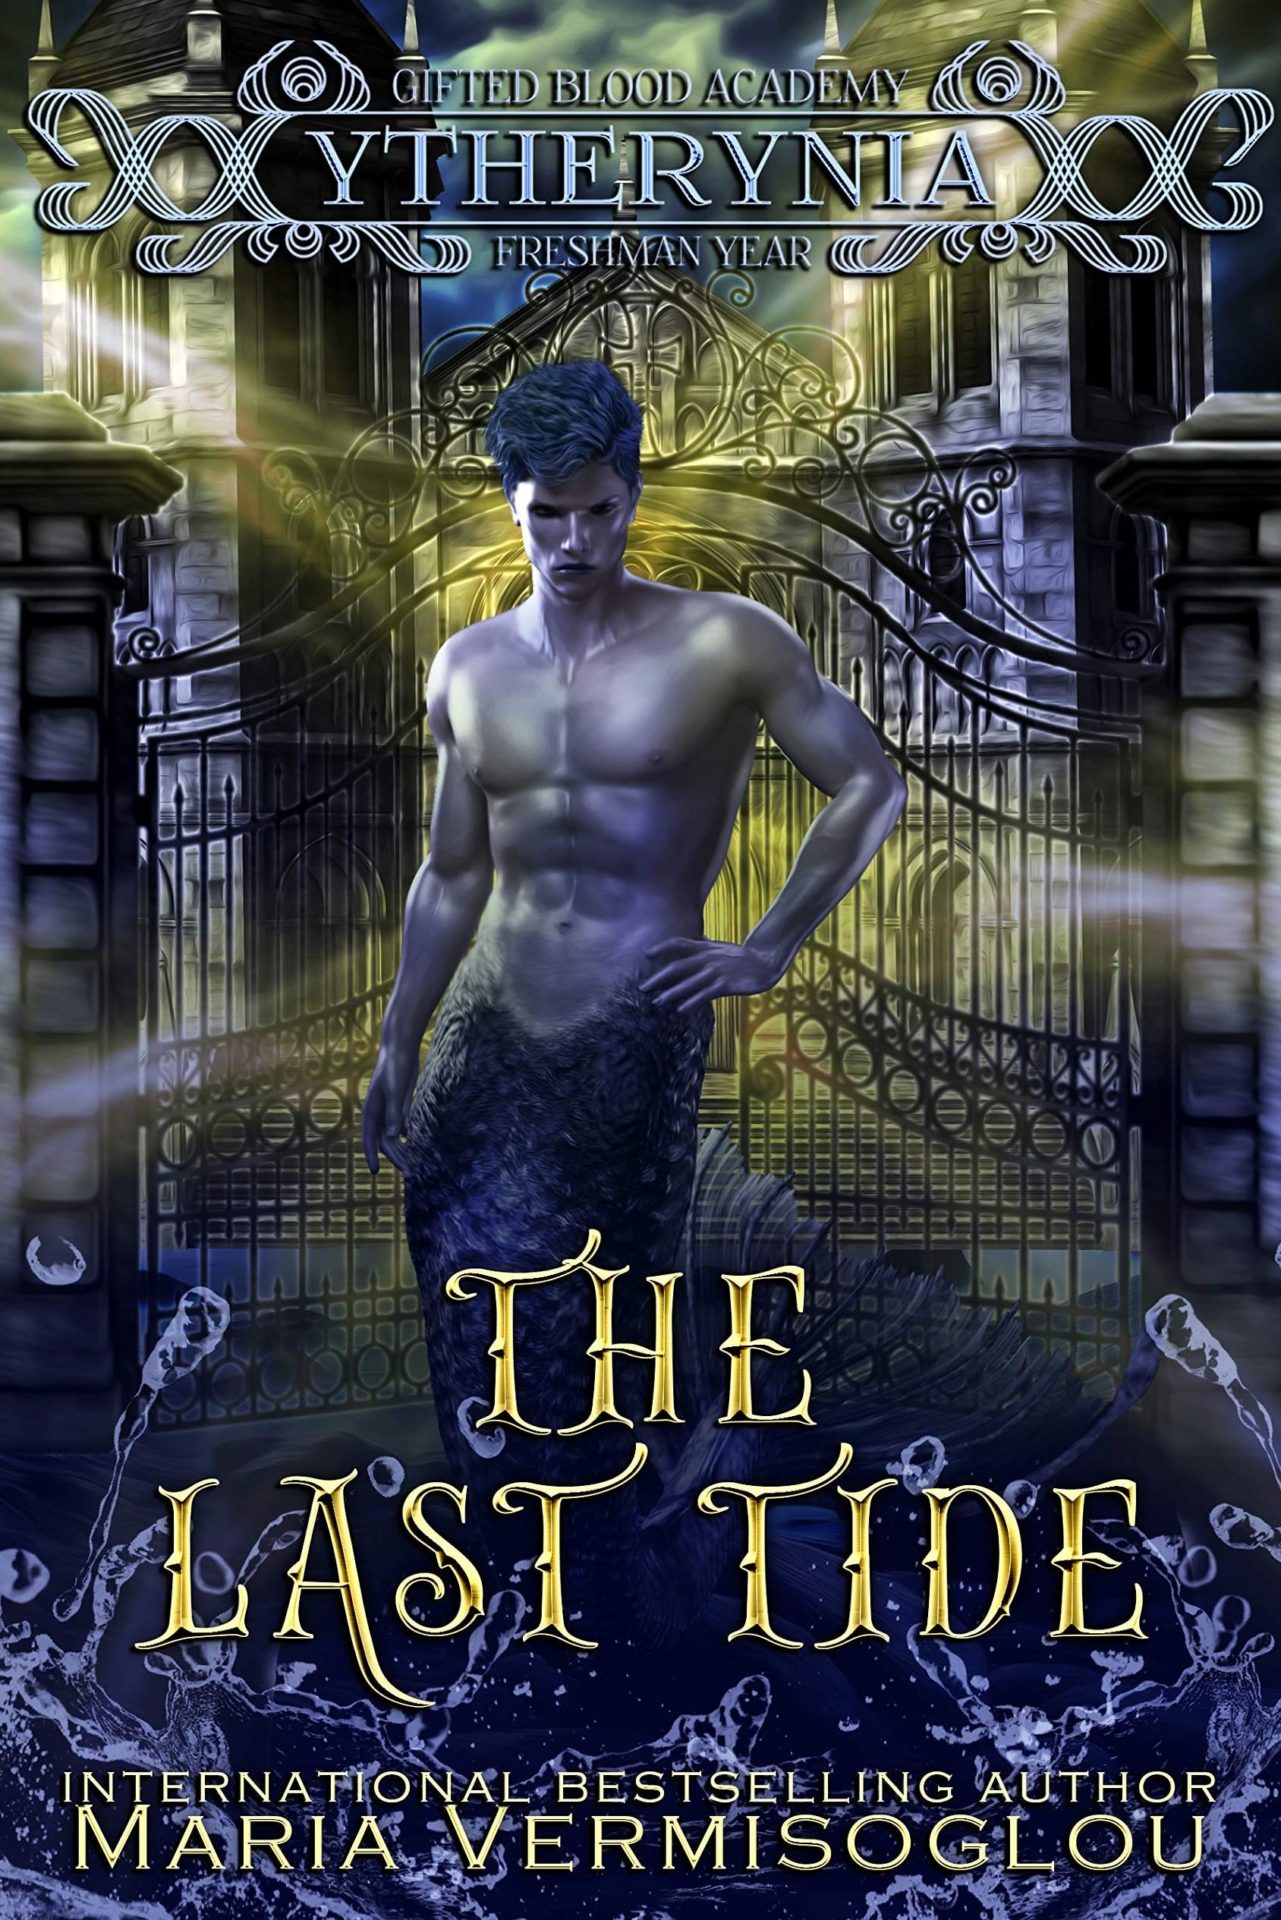 You are currently viewing The Last Tide: Gifted Blood Academy, Freshman Year (Ytherynia Book 1) – Maria Vermisoglou